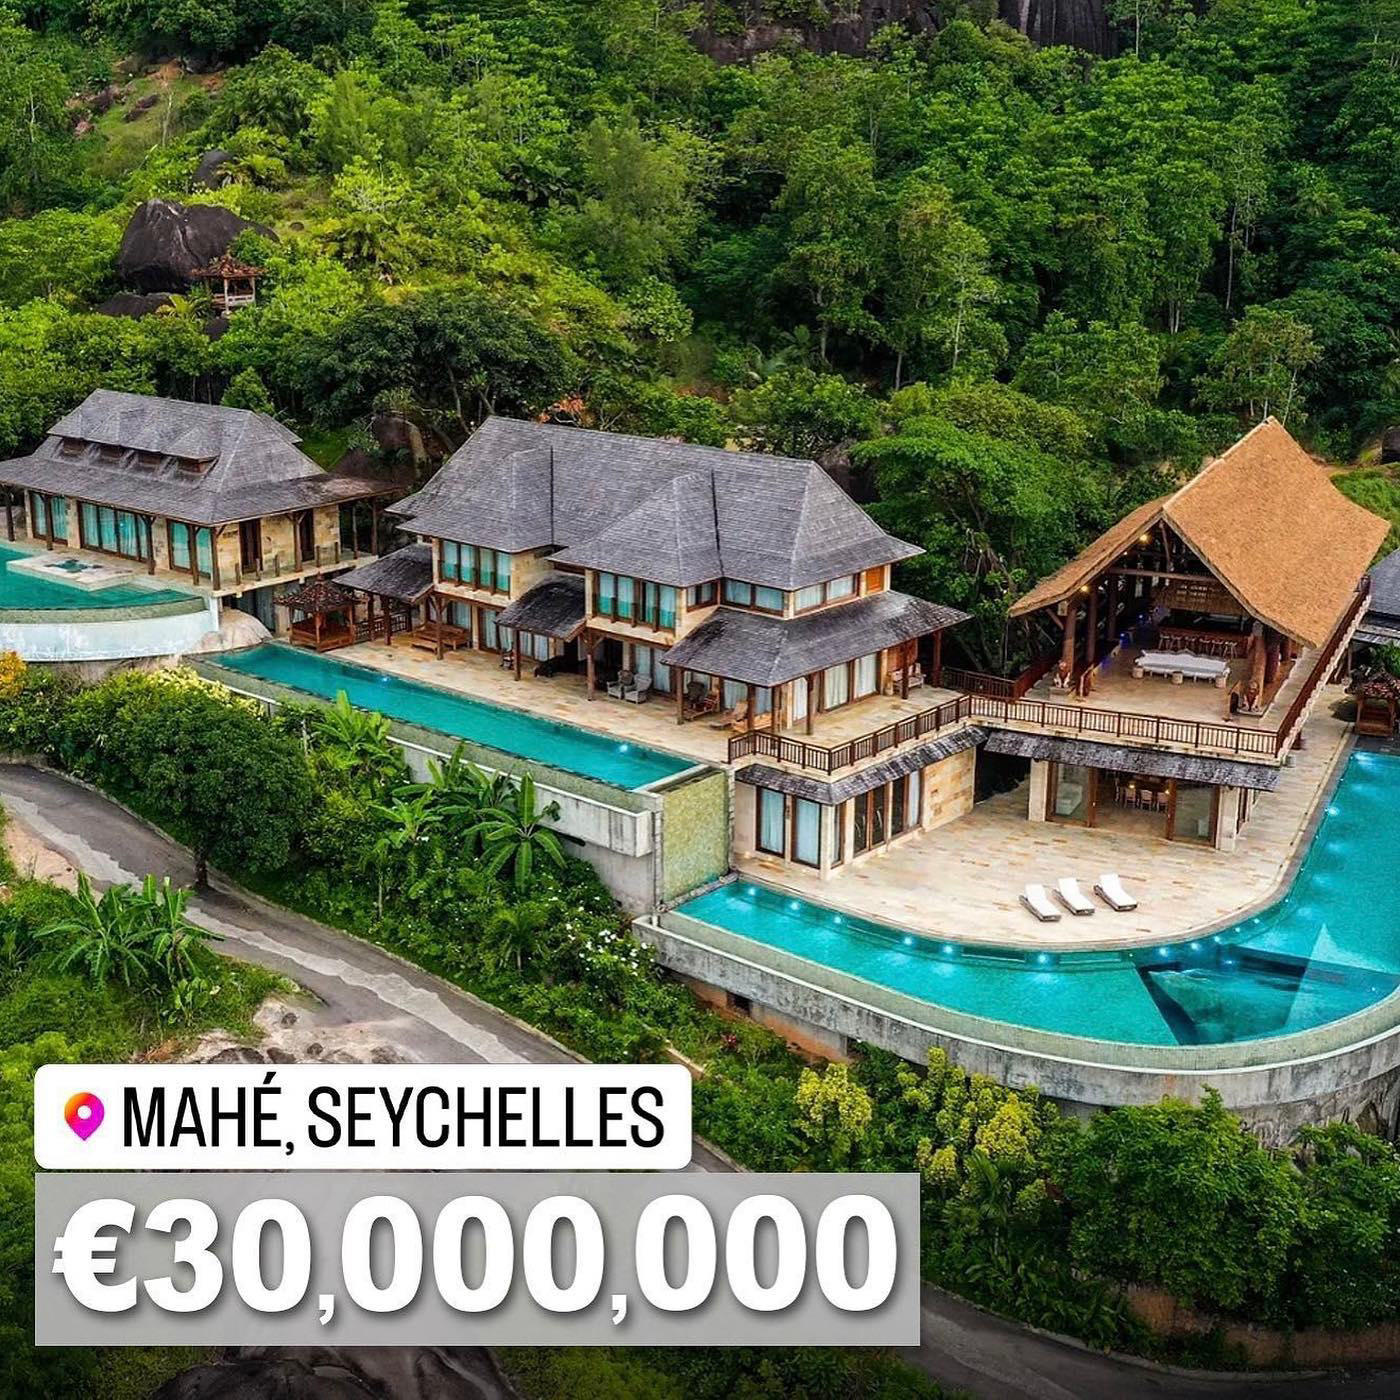 Millionaire Homes - One of the largest villas in Seychelles is listed right now for €30m